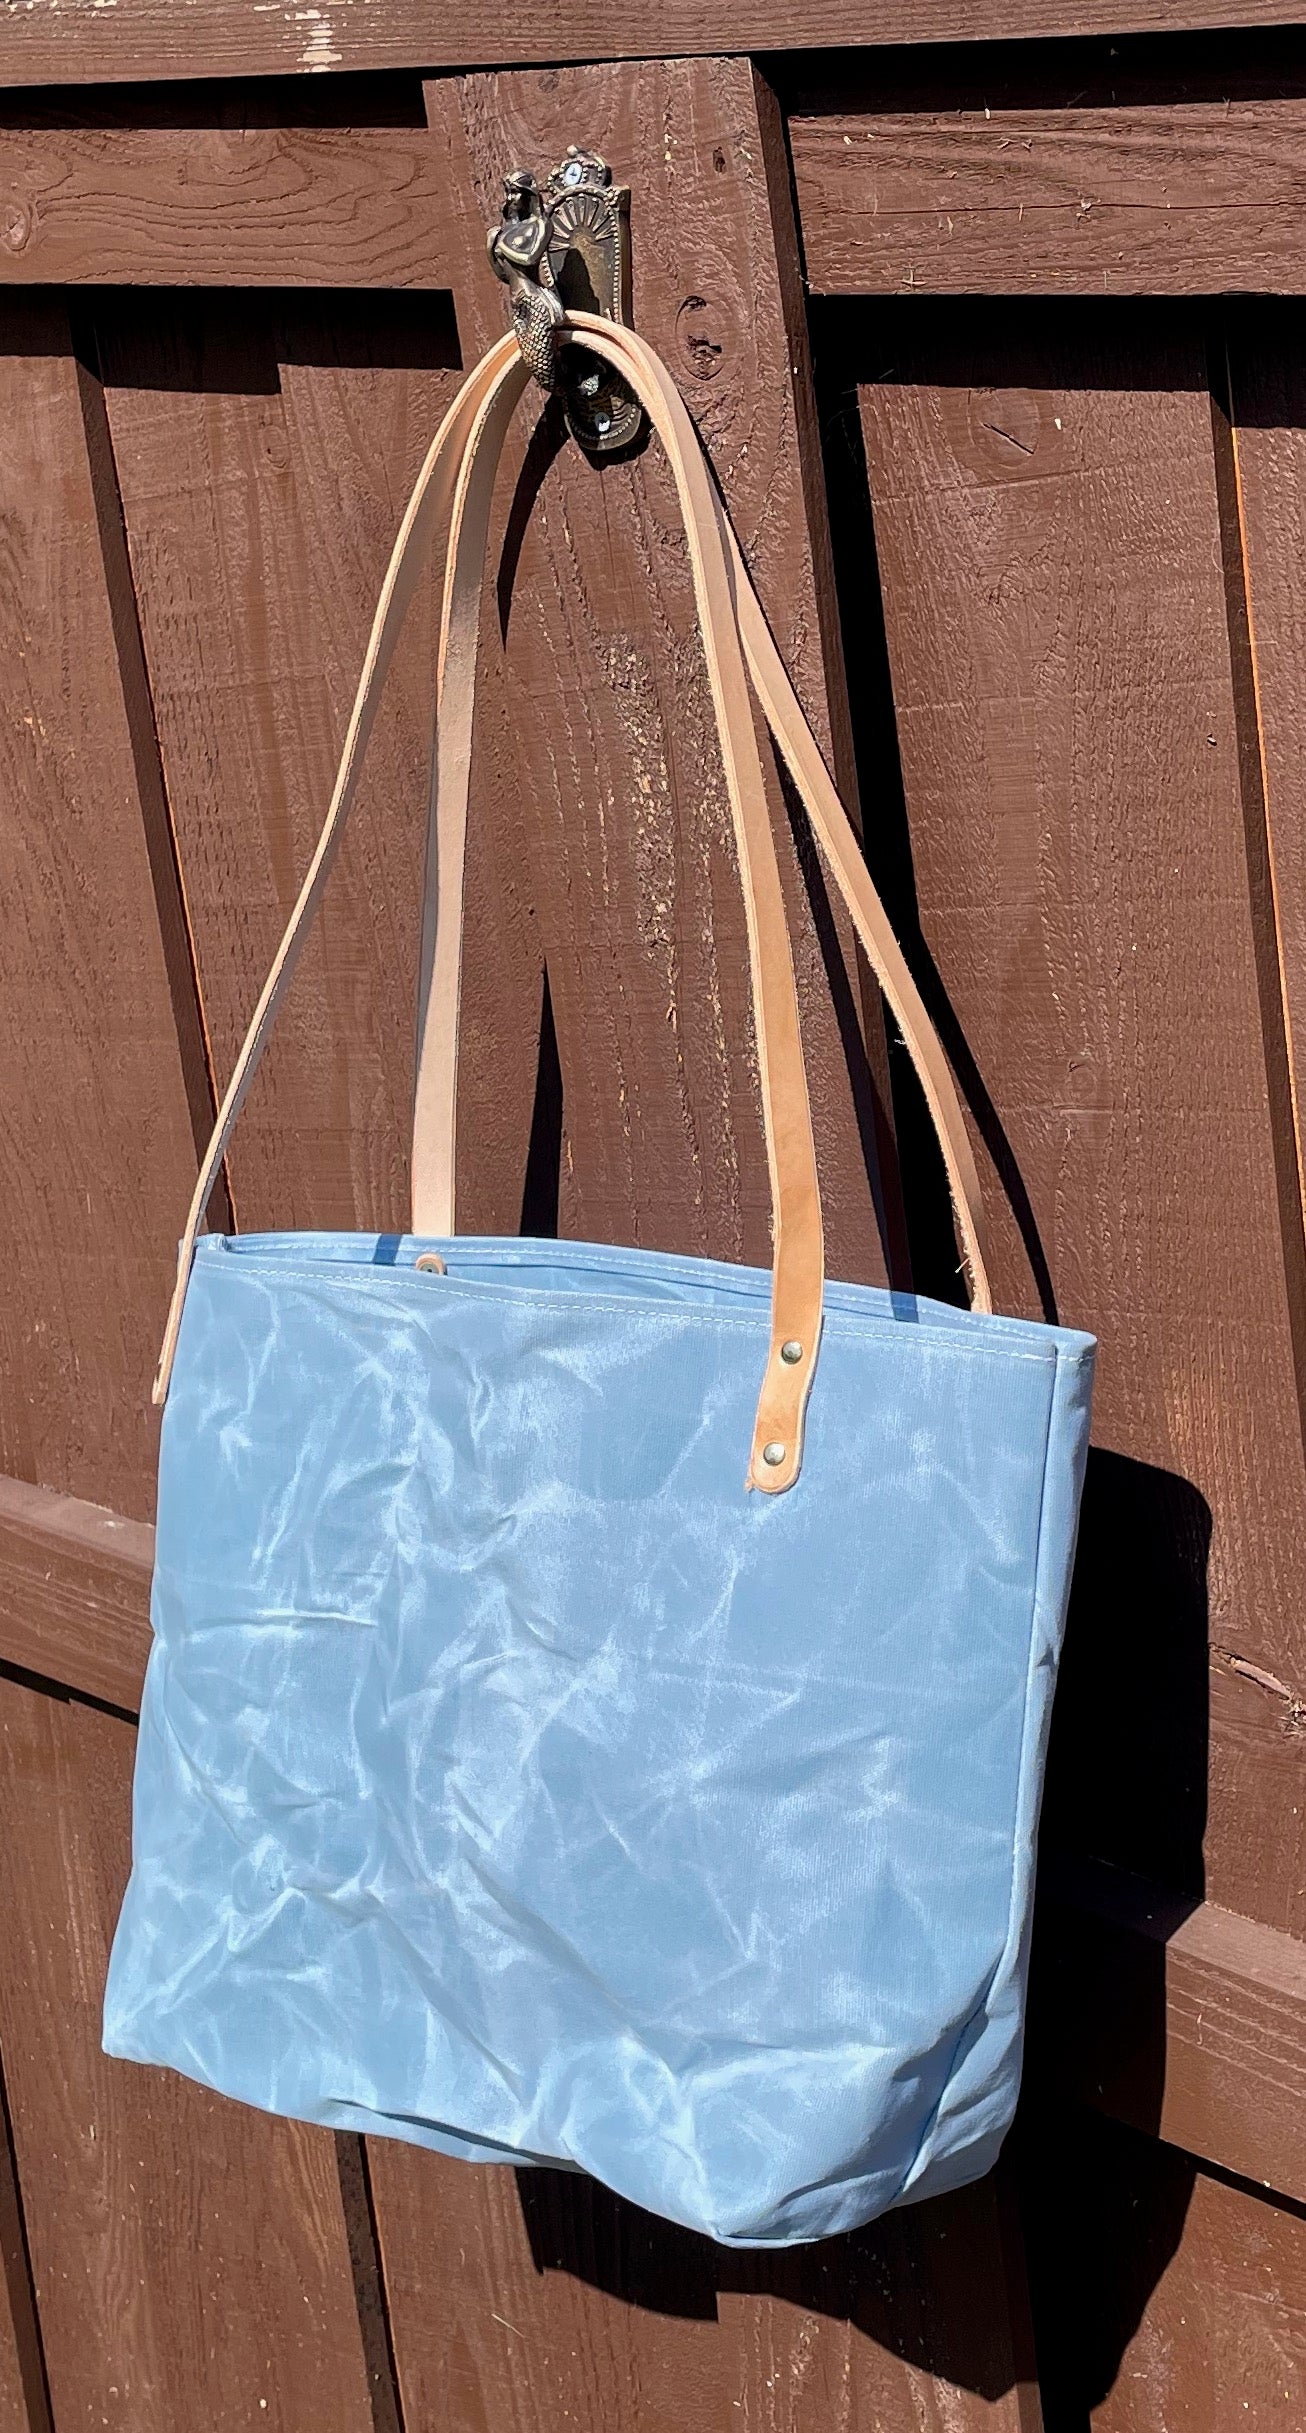 Market Tote "Get Lost"- Waxed Canvas (Sky Blue)